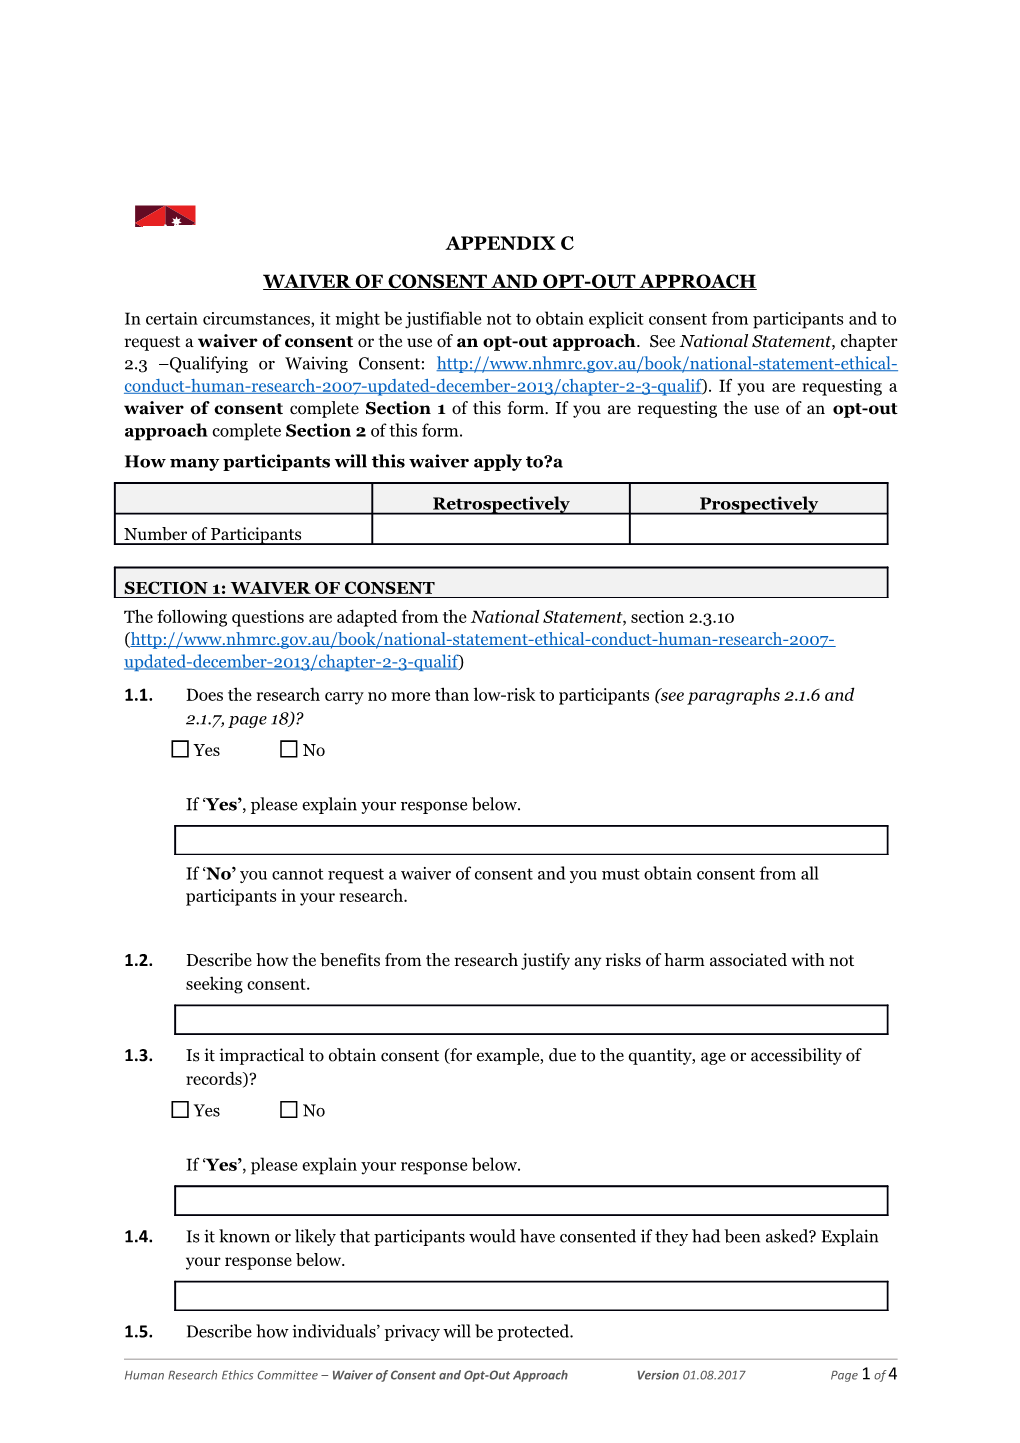 Waiver of Consent and Opt-Out Approach